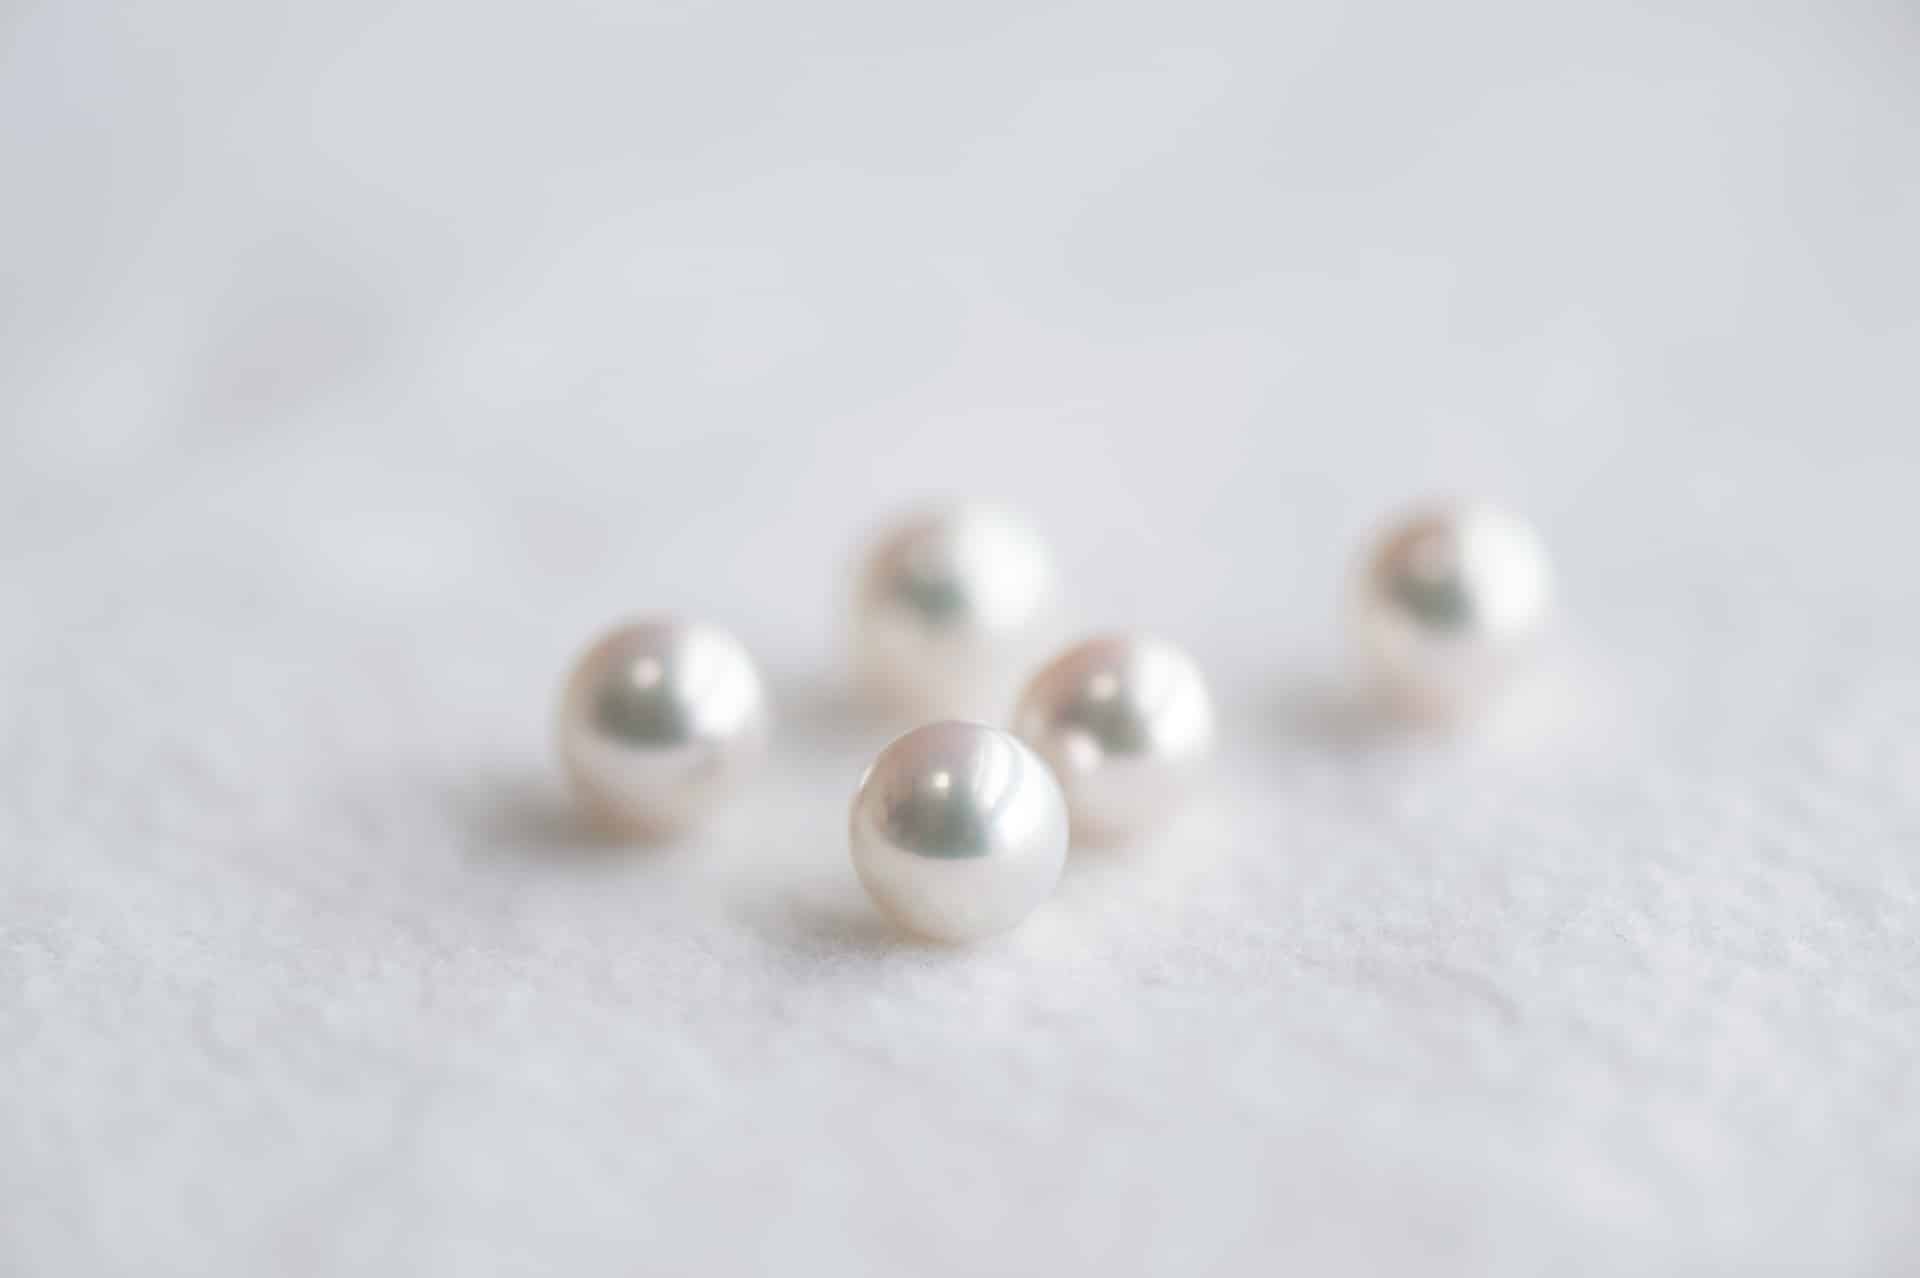 How to recognize genuine pearls